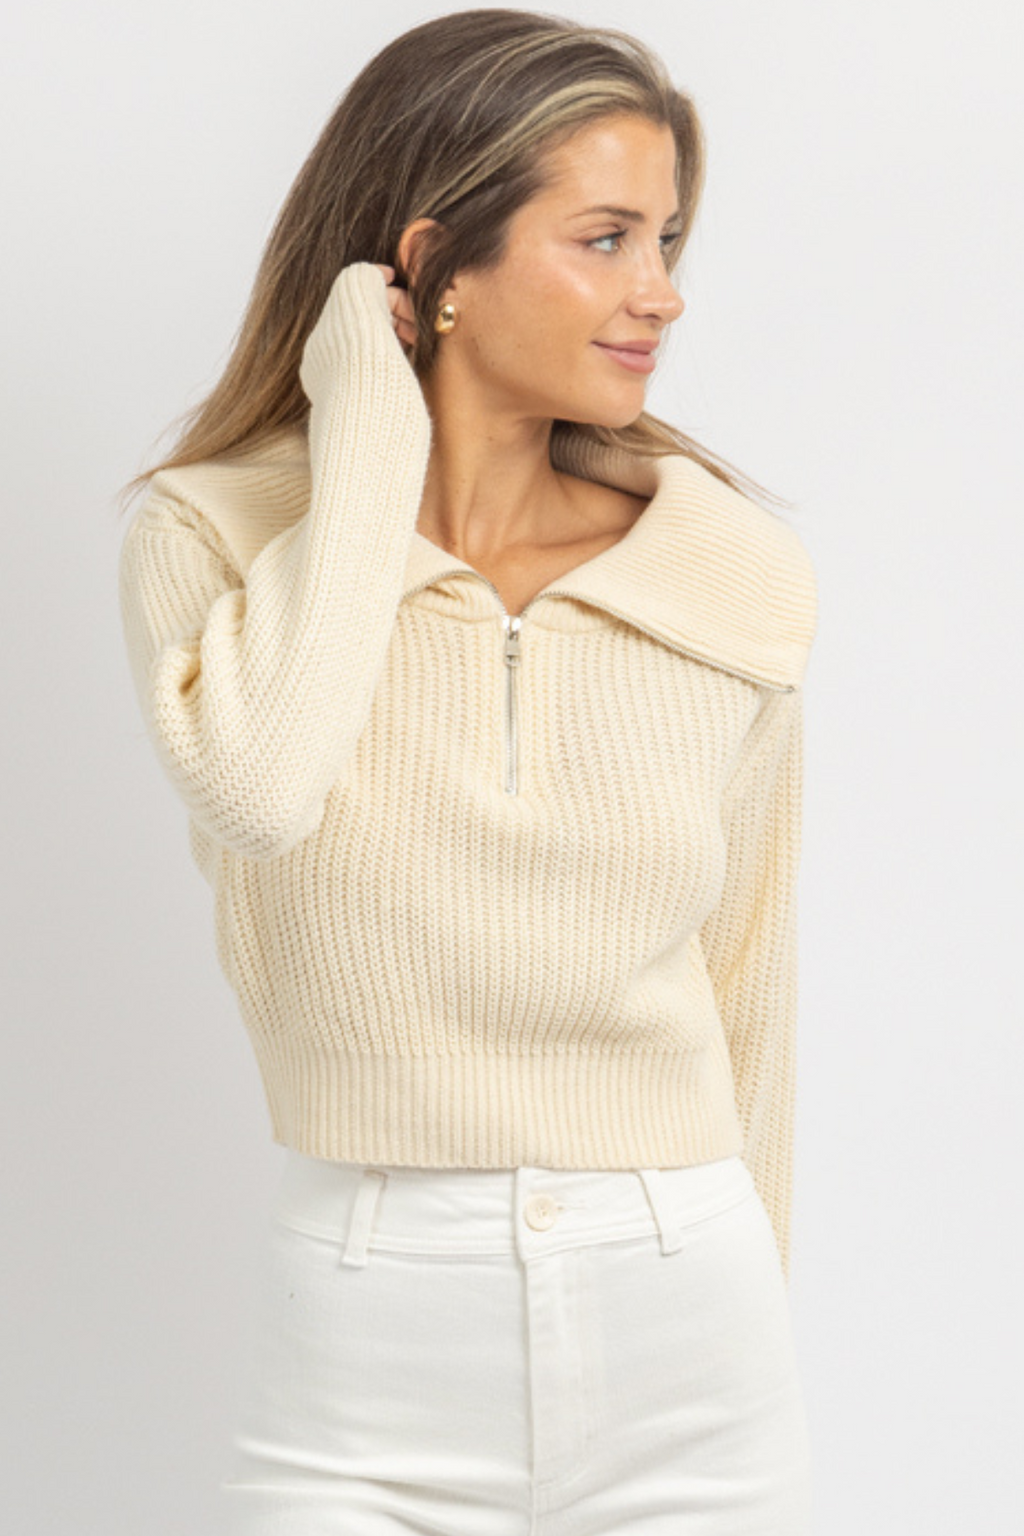 PAXTON CREAM COLLARED KNIT TOP